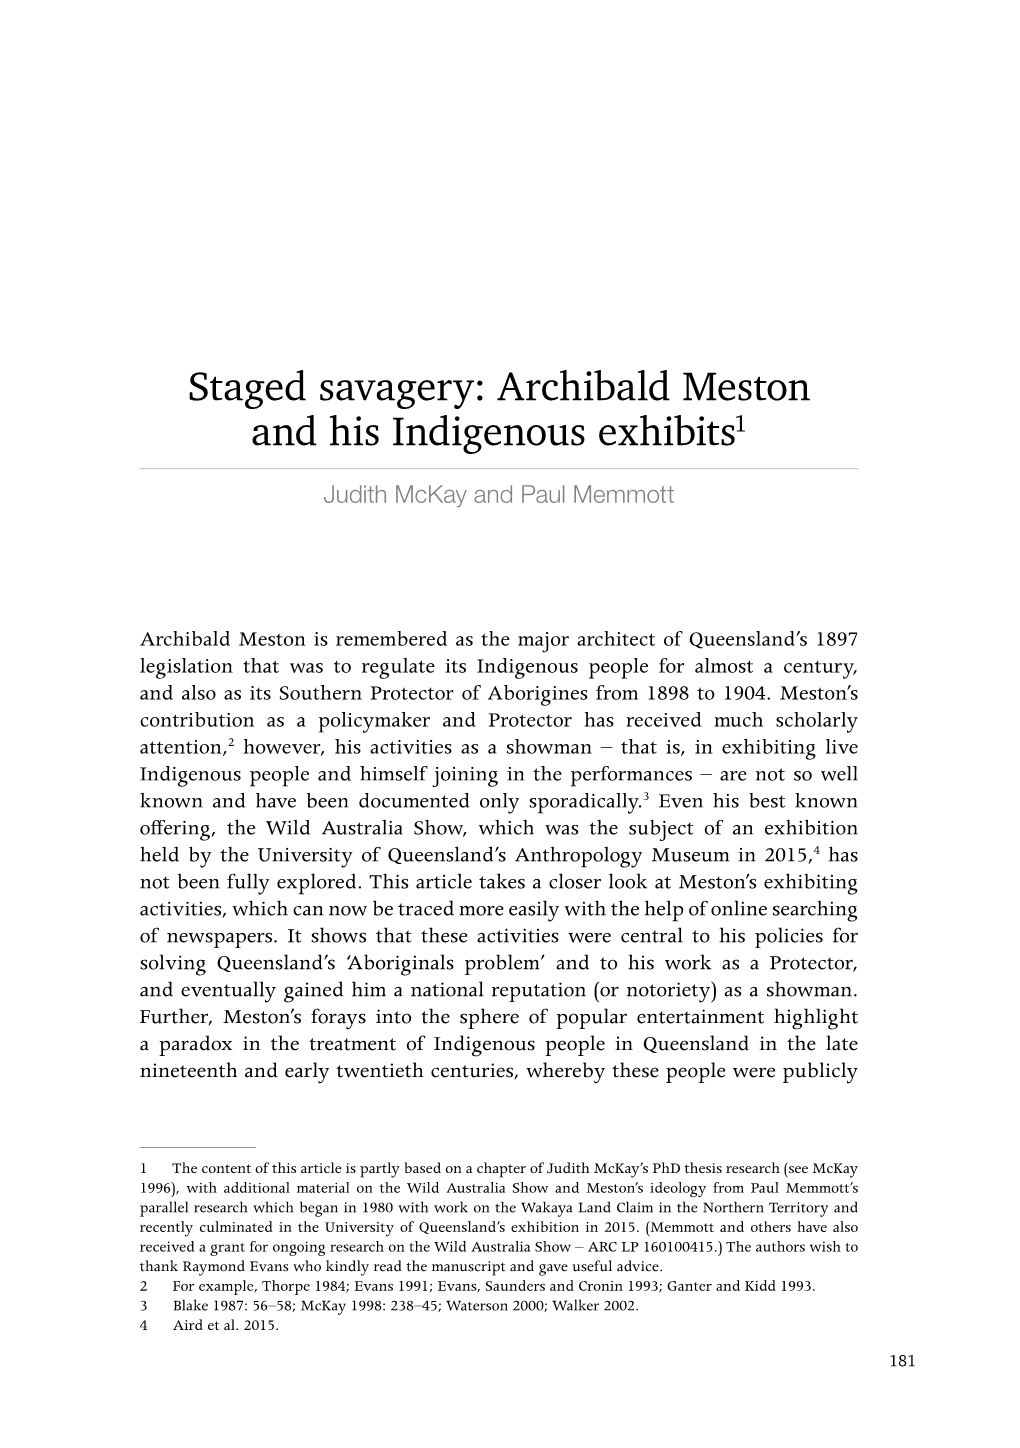 Staged Savagery: Archibald Meston and His Indigenous Exhibits1 Judith Mckay and Paul Memmott